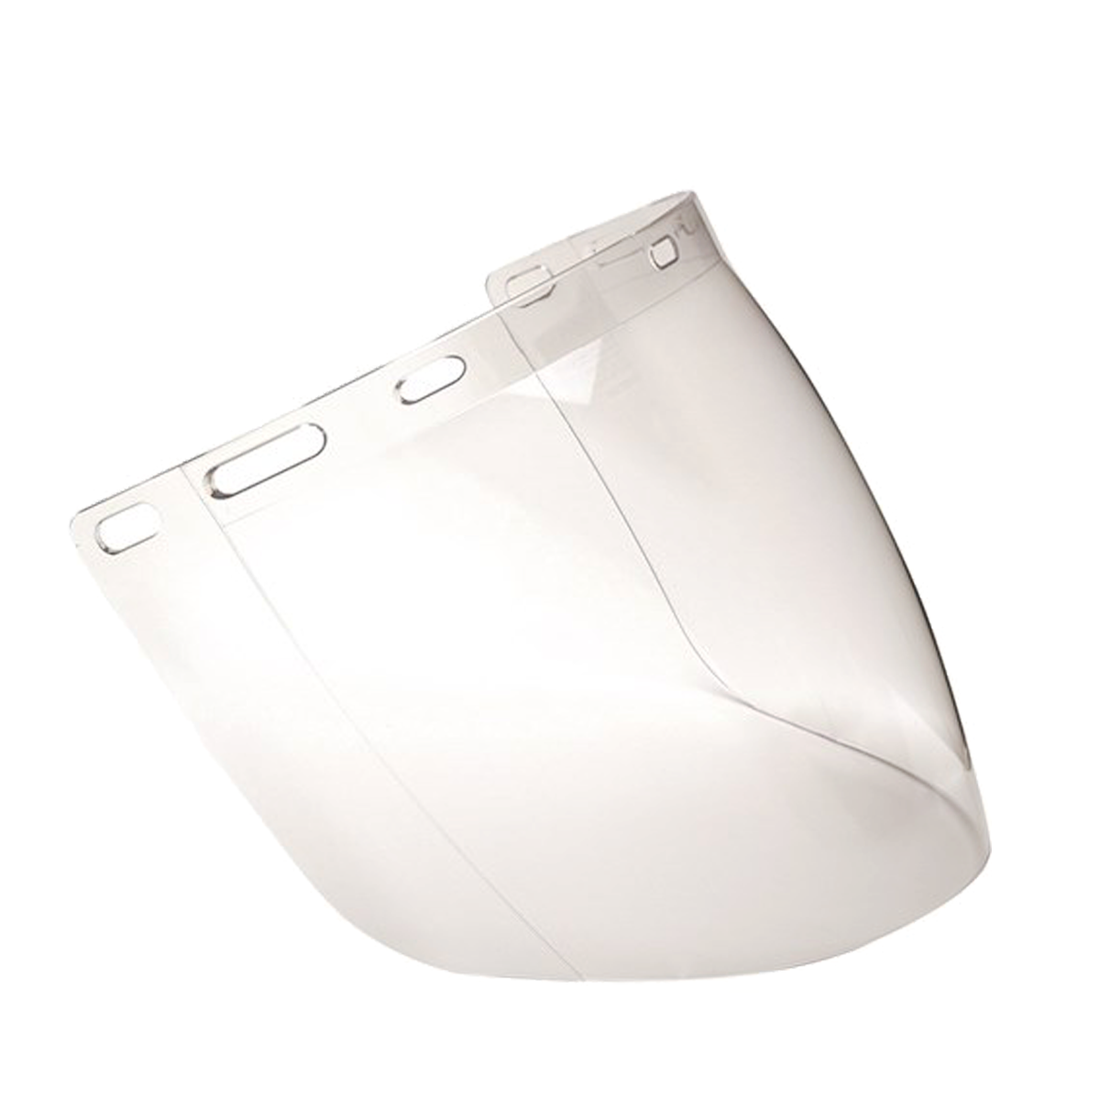 Pro Choice Striker Clear Visor to Suit Browguards (BG & HHBGE) VCE